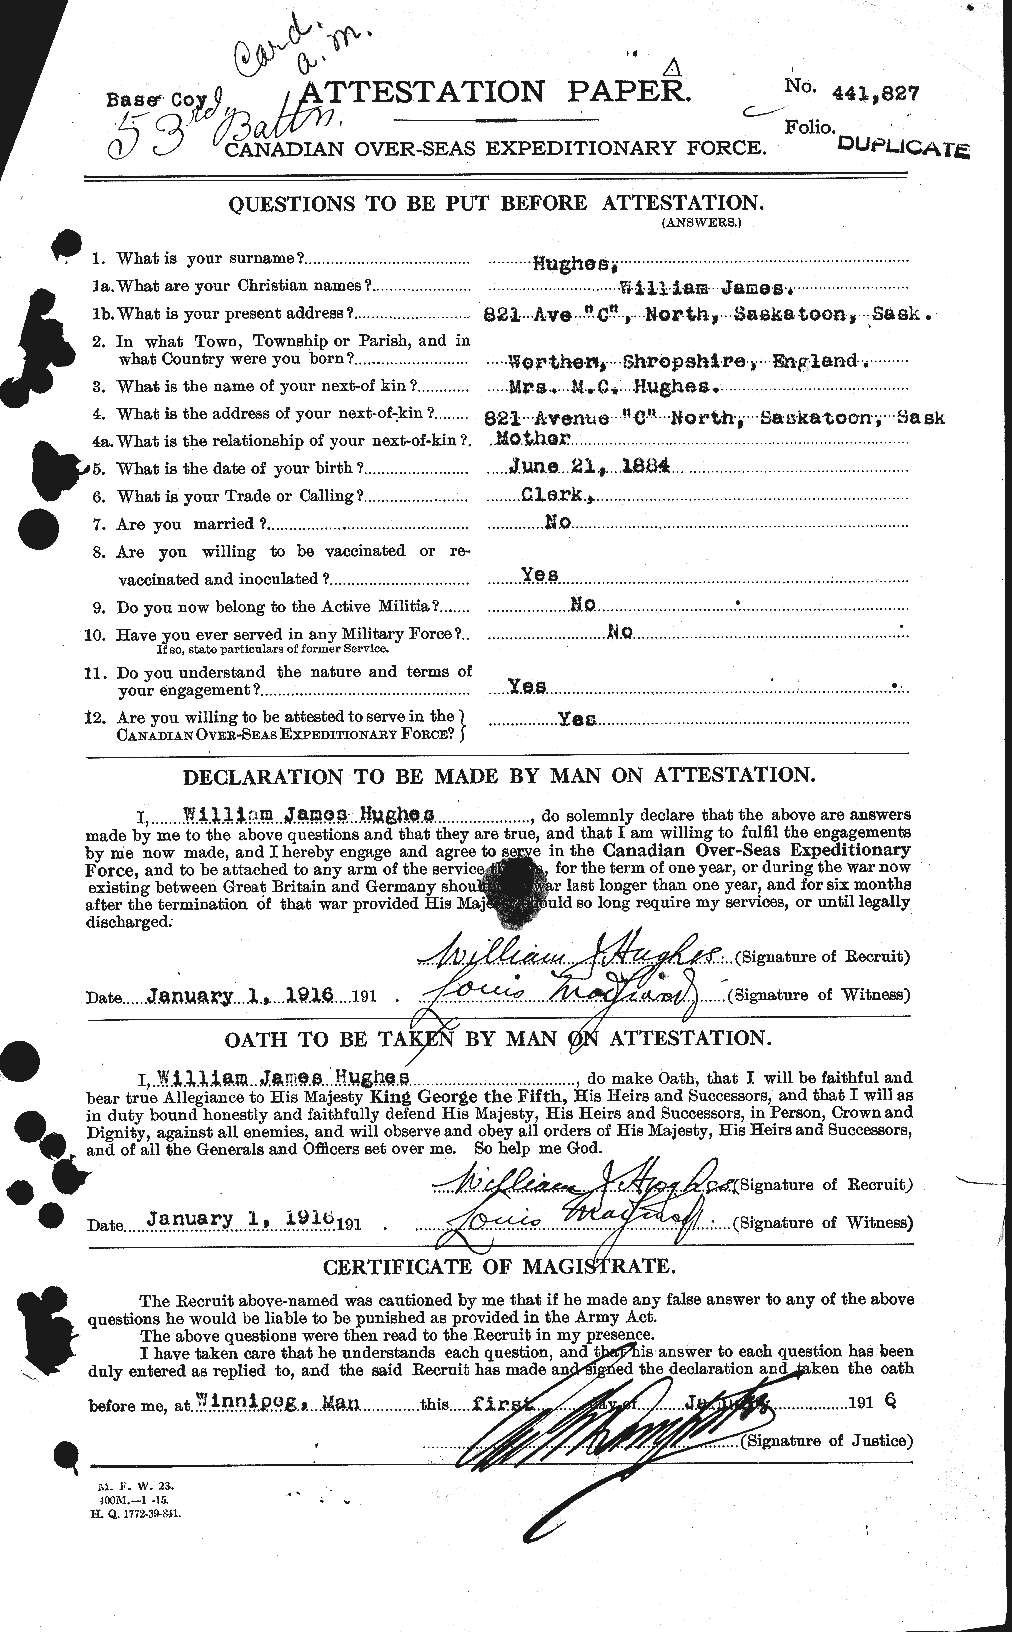 Personnel Records of the First World War - CEF 405940a